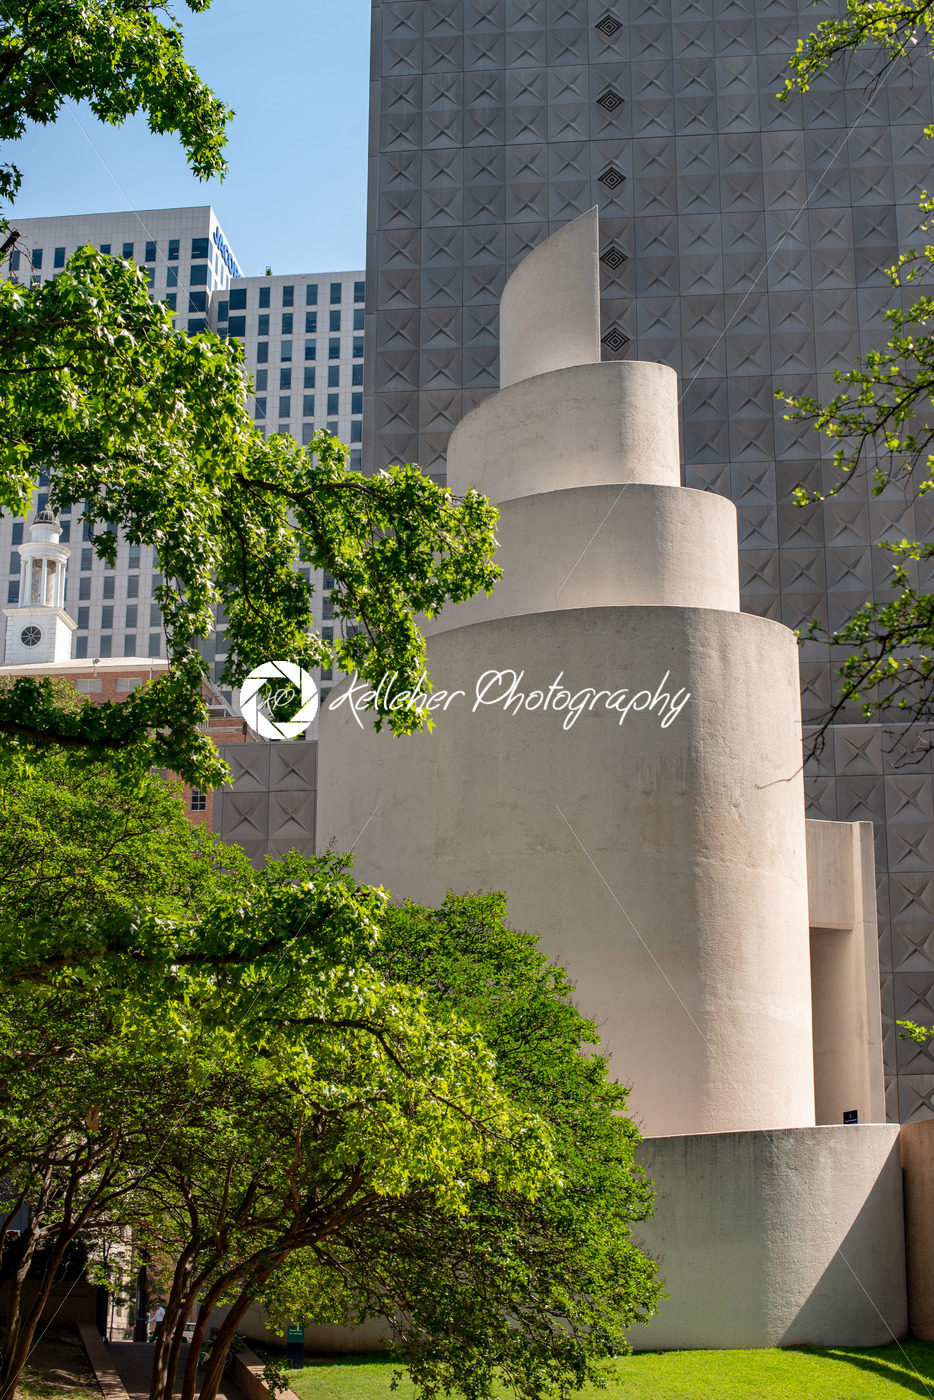 Dallas, Texas – May 7, 2018: Thanks-giving Square, in Dallas, Texas, hosts the non-denominational Thanks giving Chapel - Kelleher Photography Store